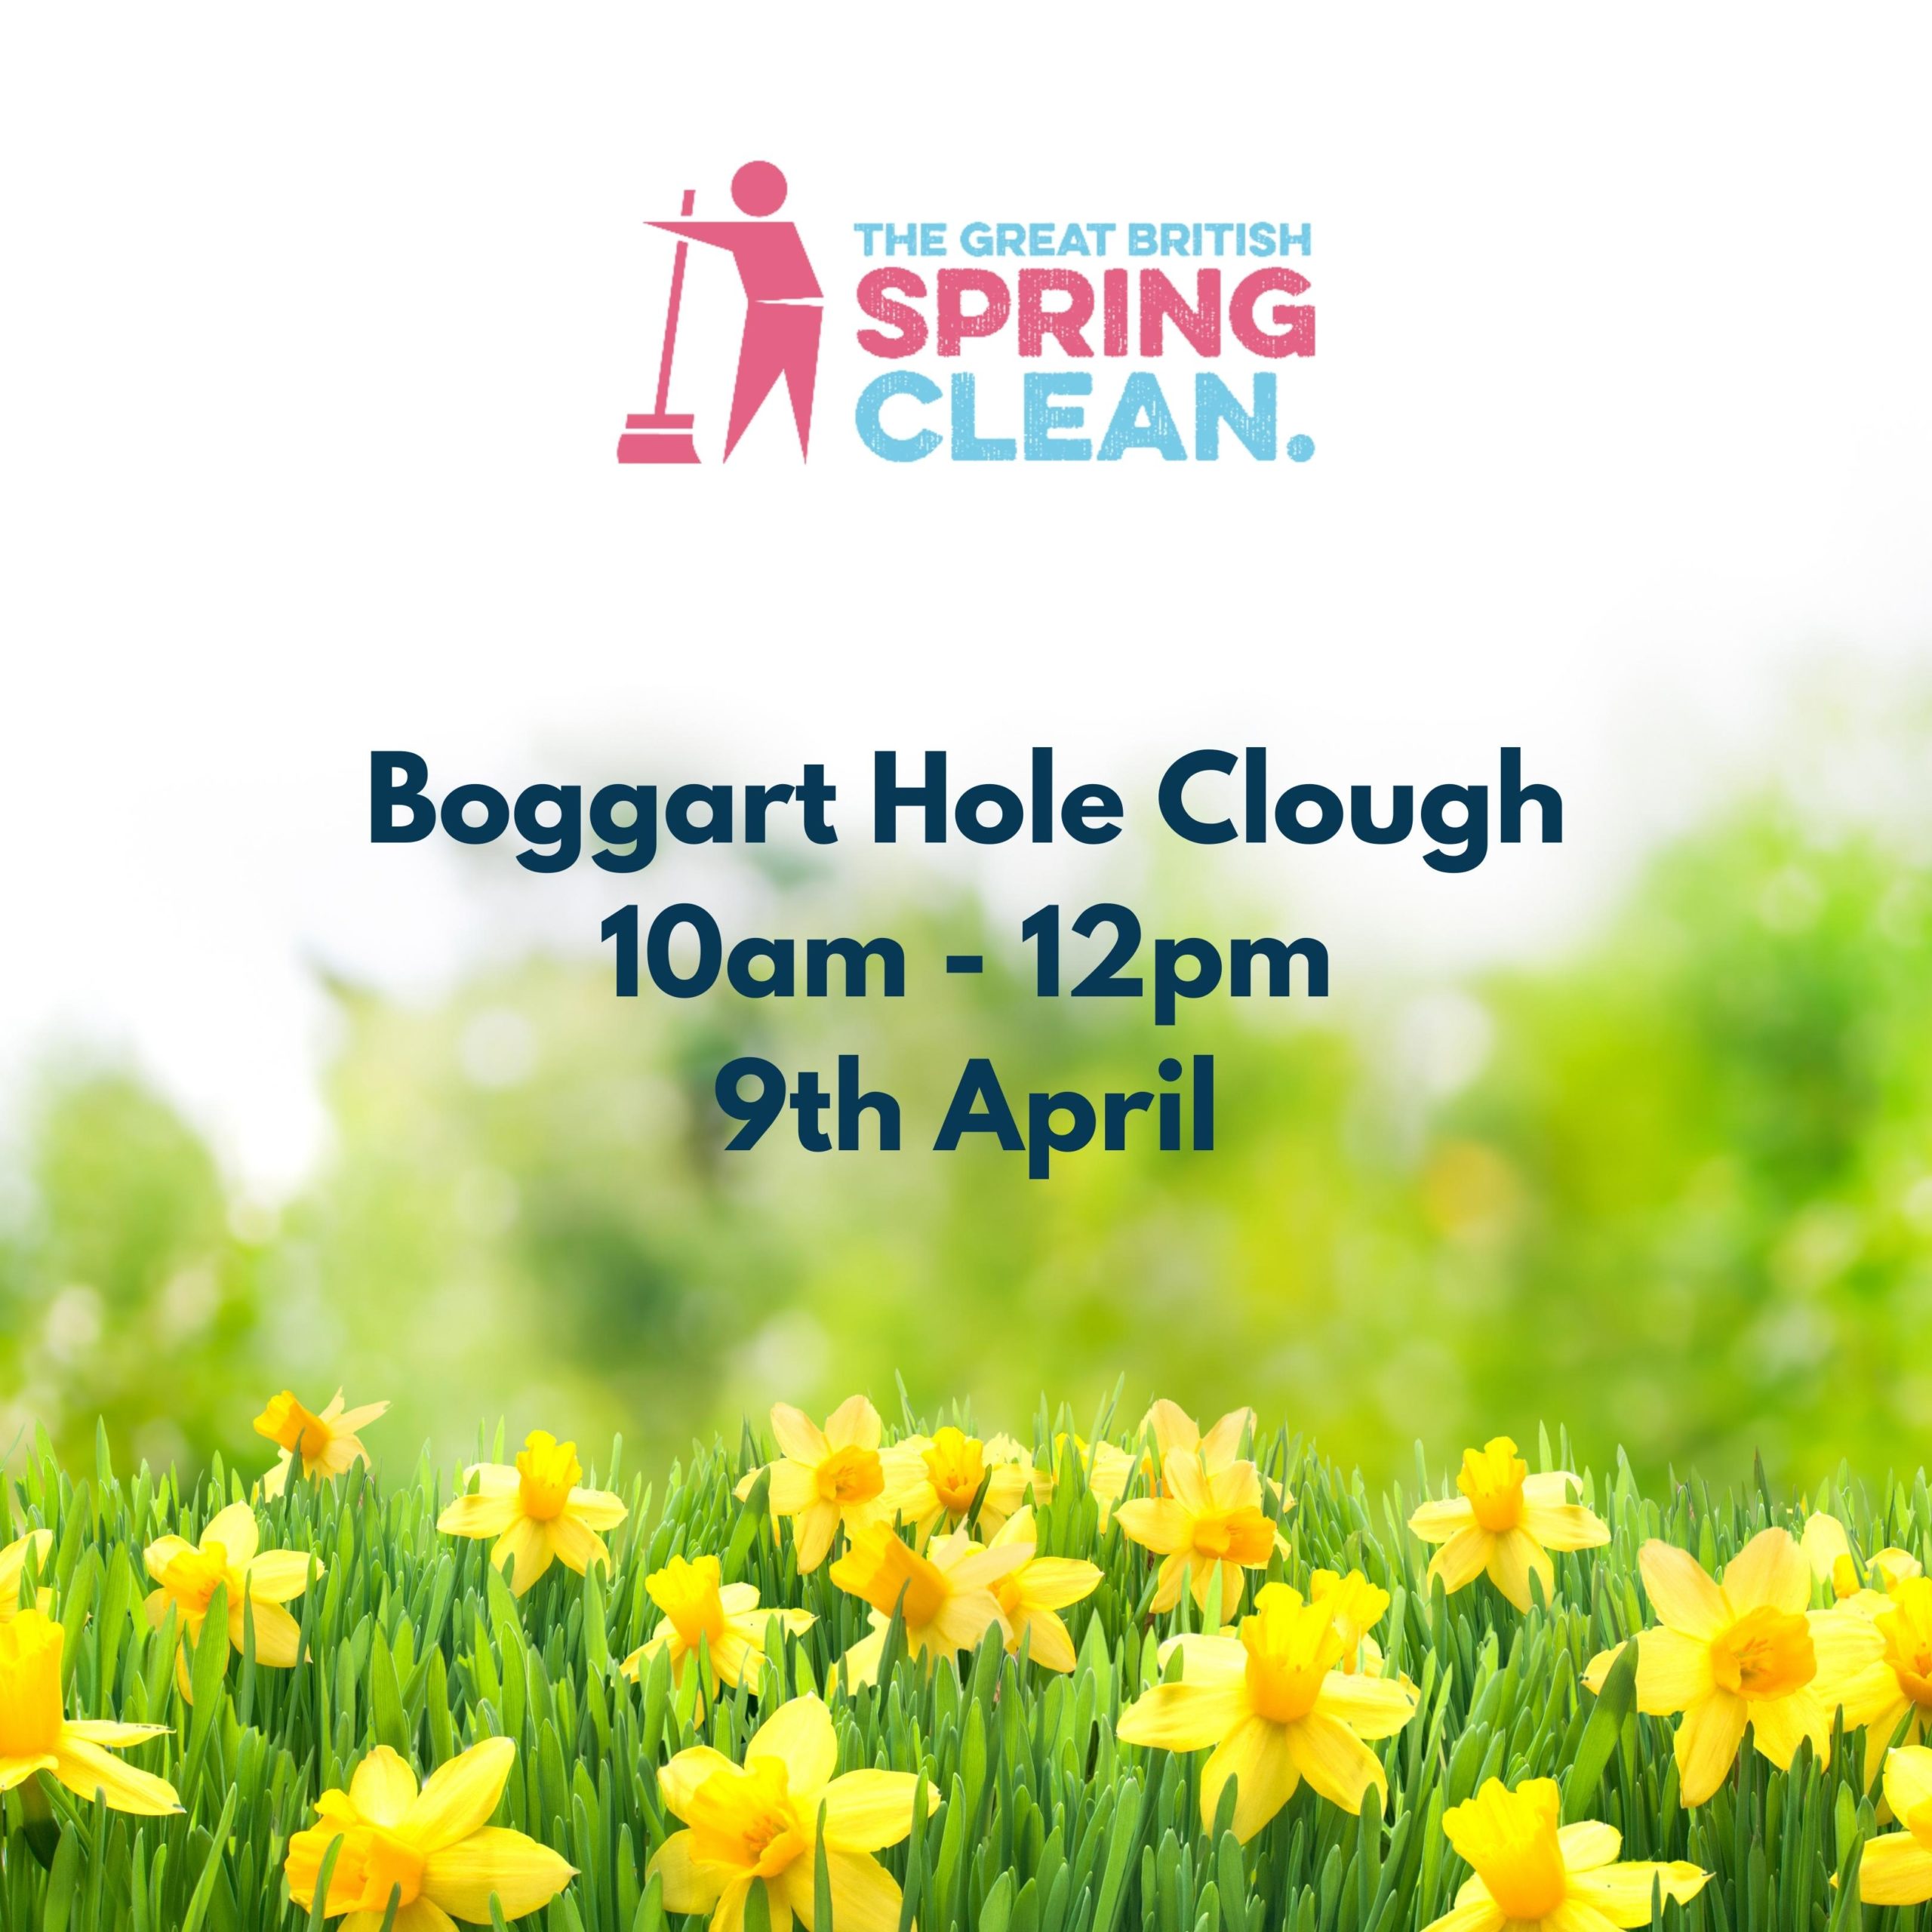 The Great British Spring Clean: Boggart Hole Clough